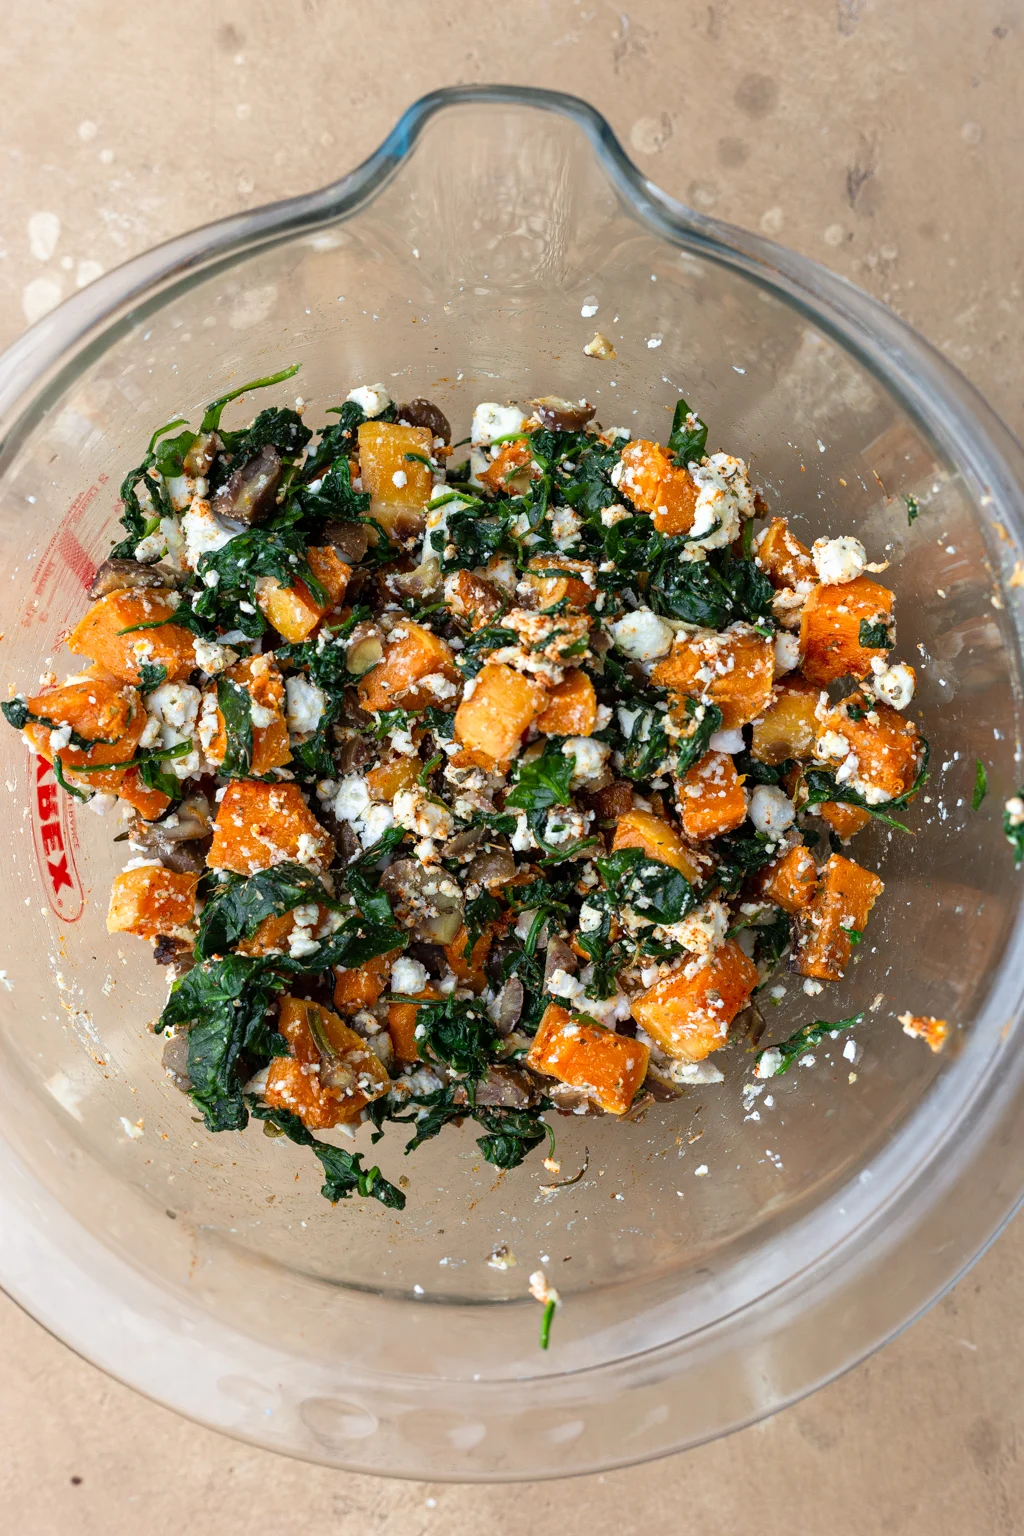 Butternut squash, spinach and feta filling mixed